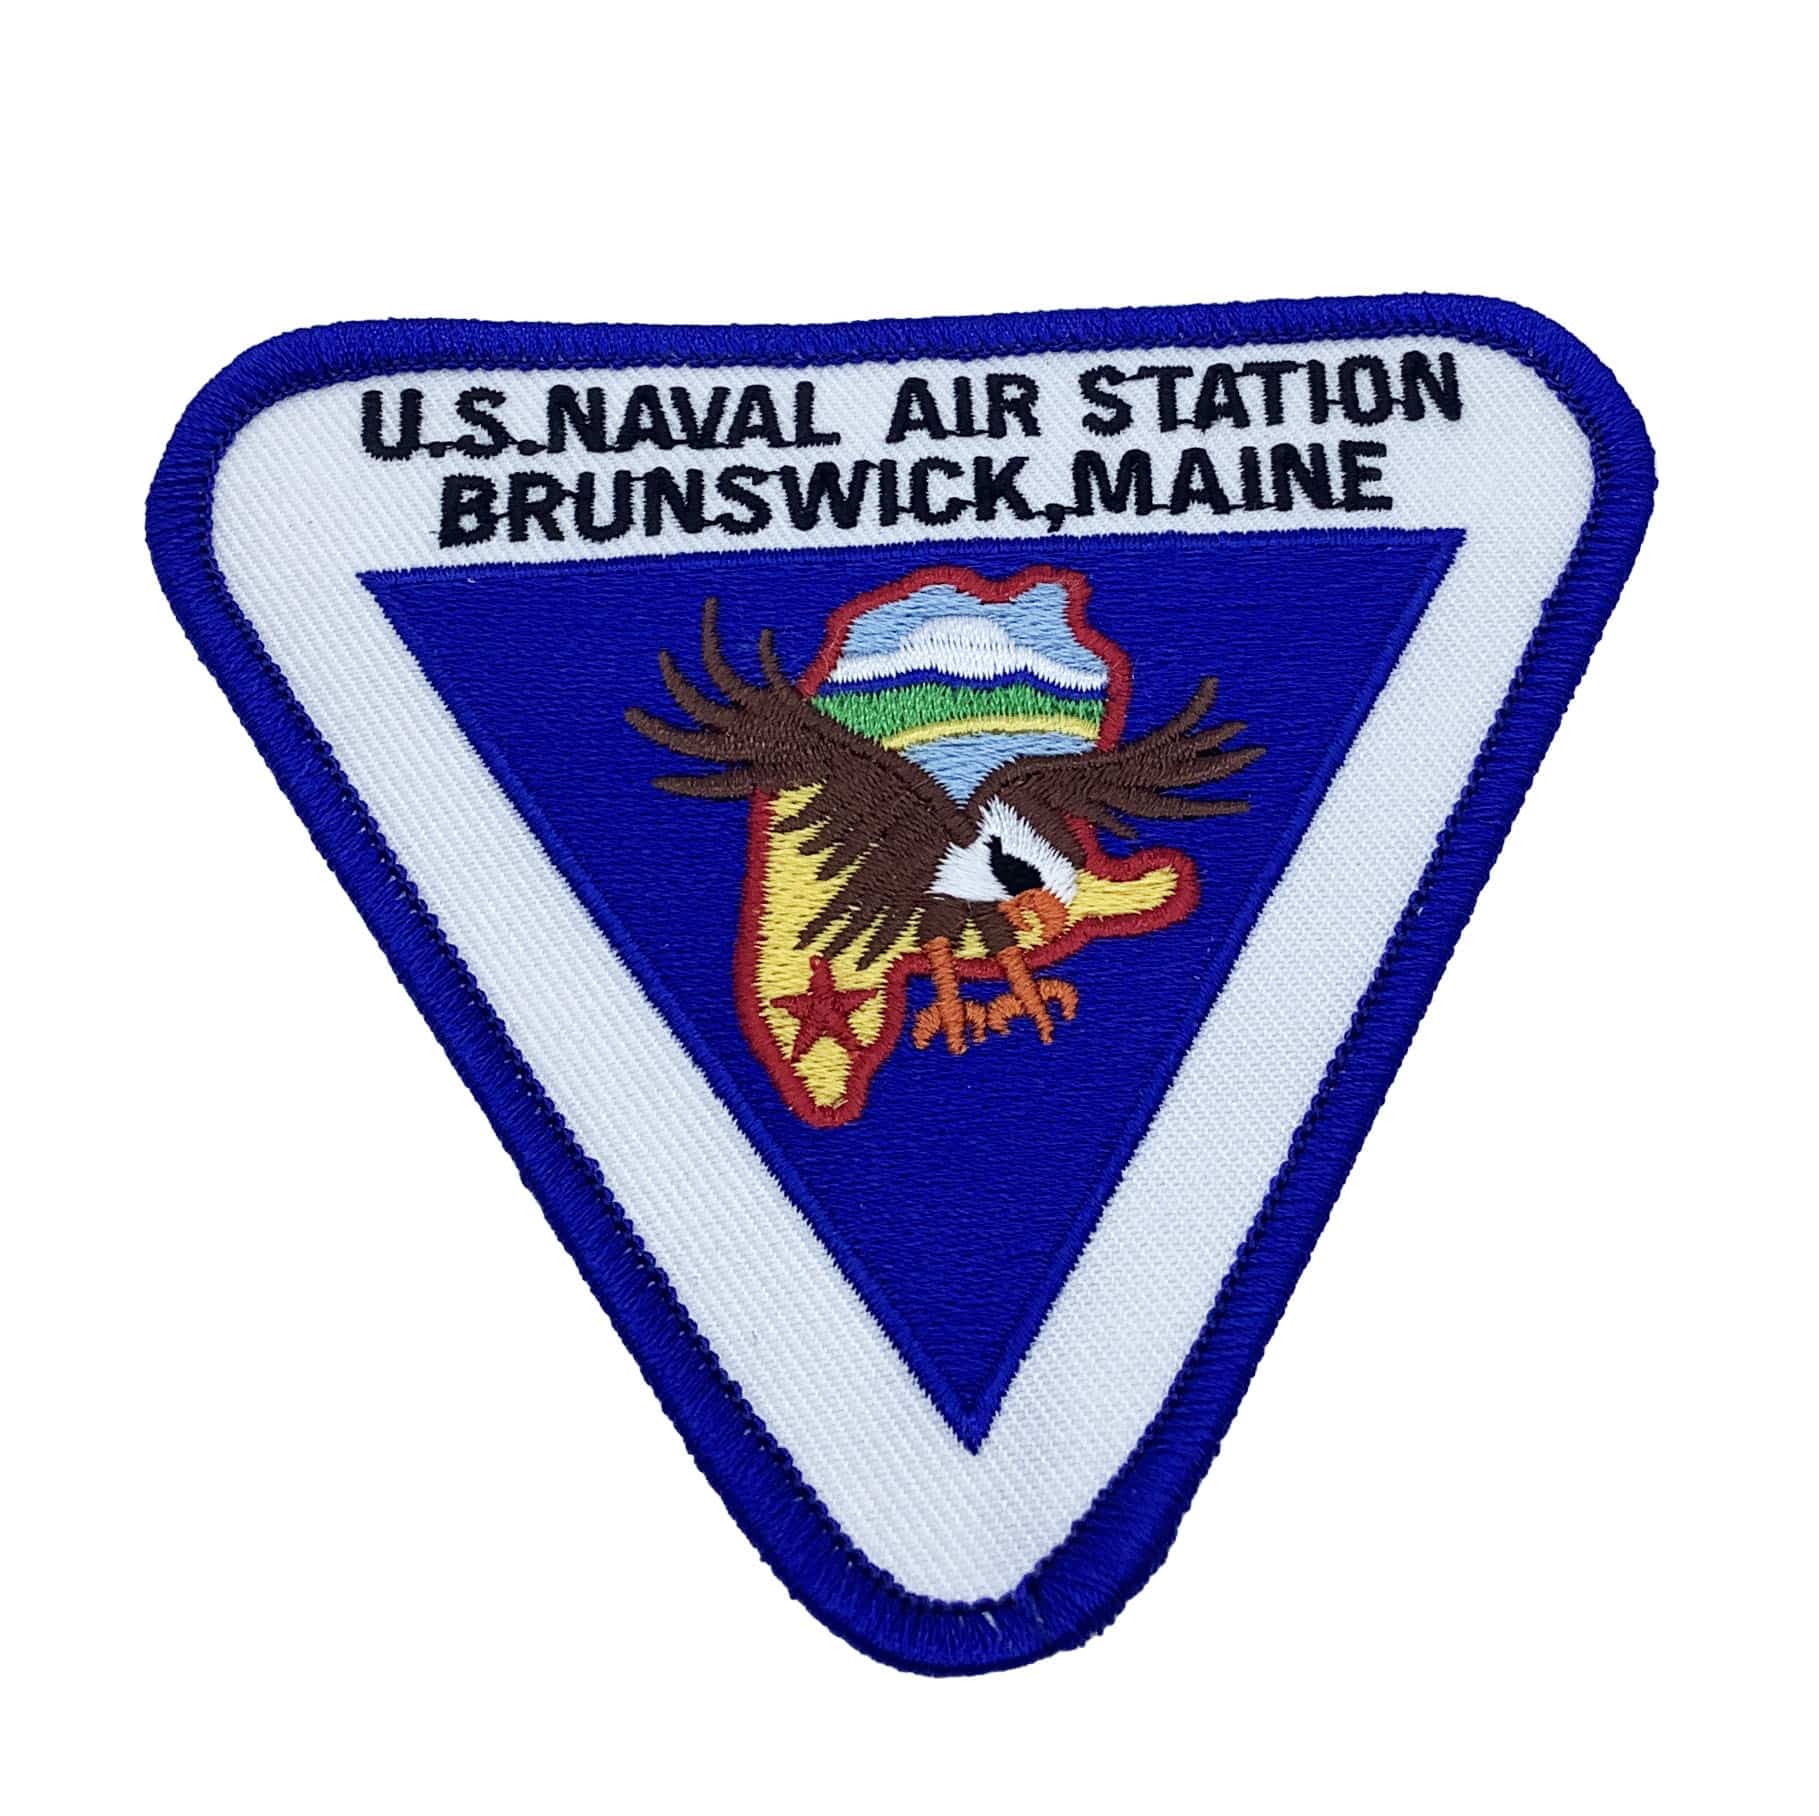 NAS Brunswick Patch - With Hook and Loop